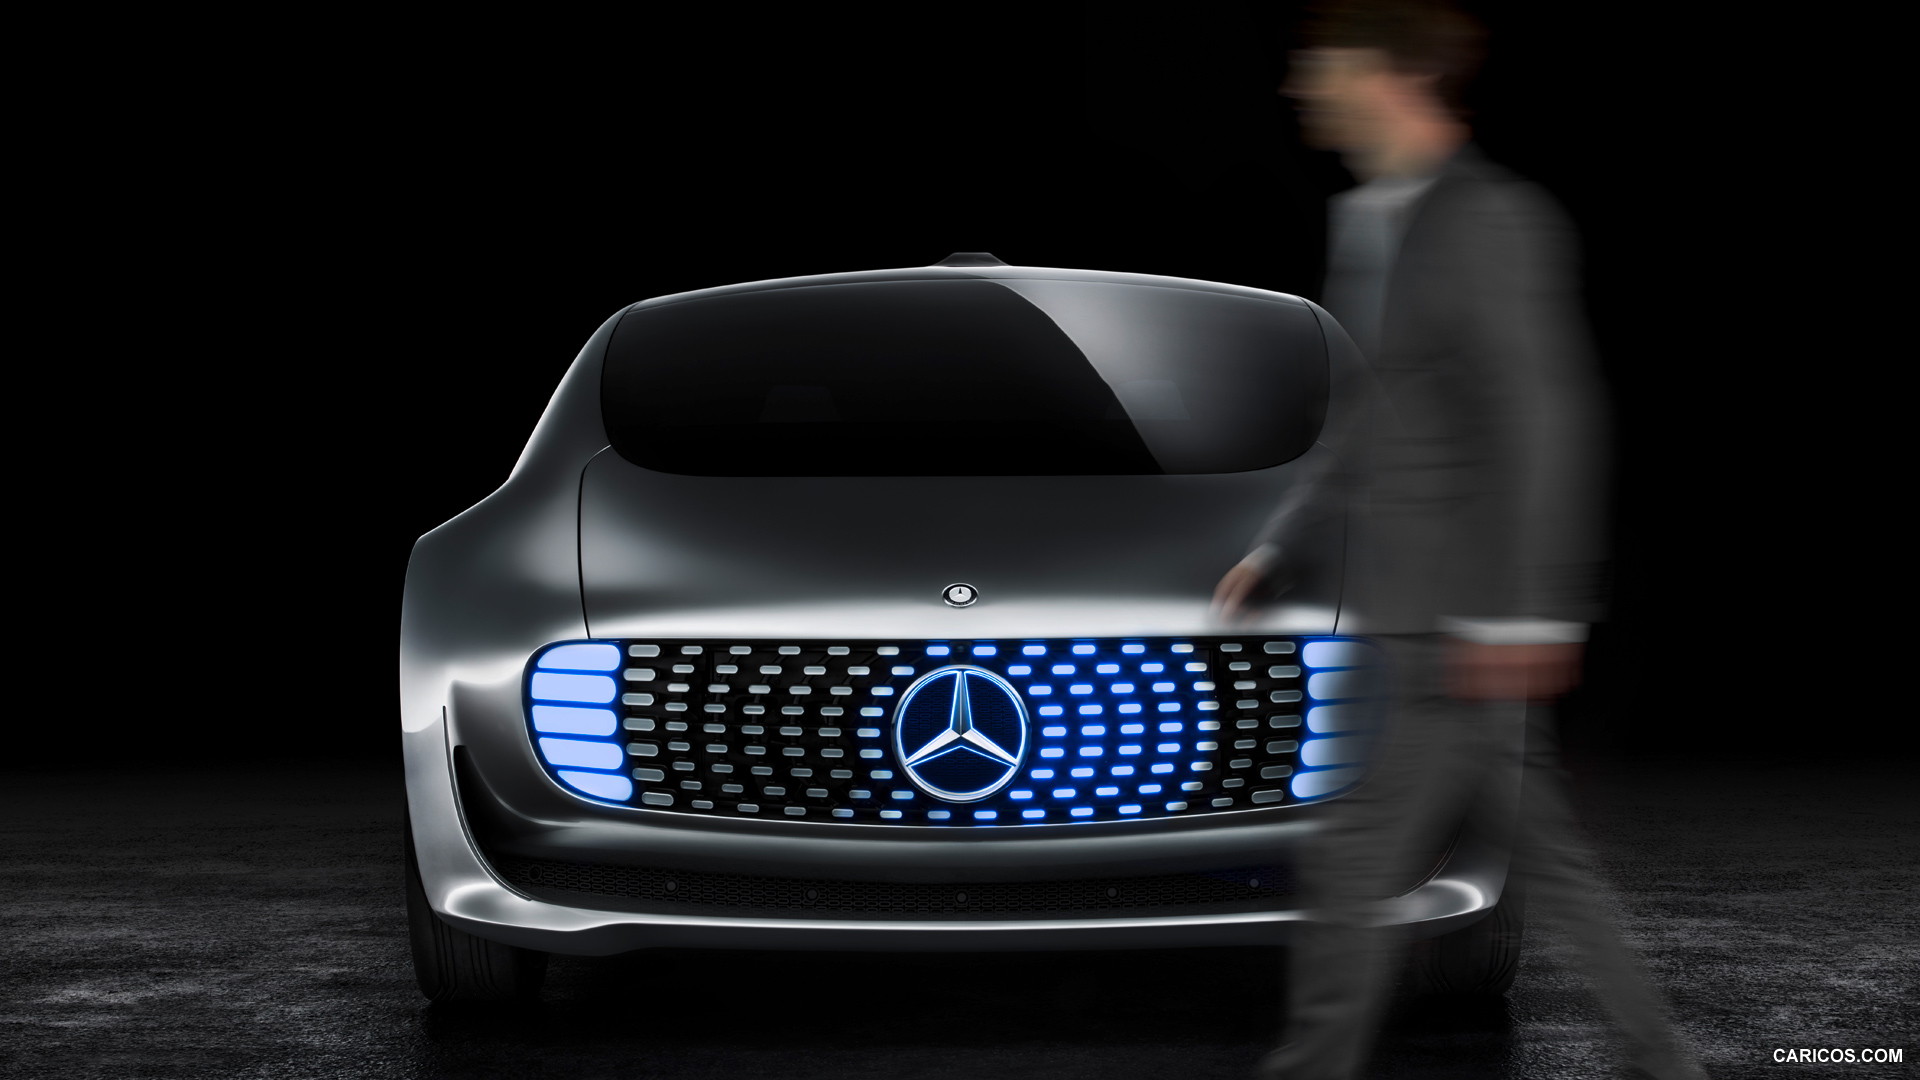 2015 Mercedes-Benz F 015 Luxury in Motion Concept  - Front, #52 of 92